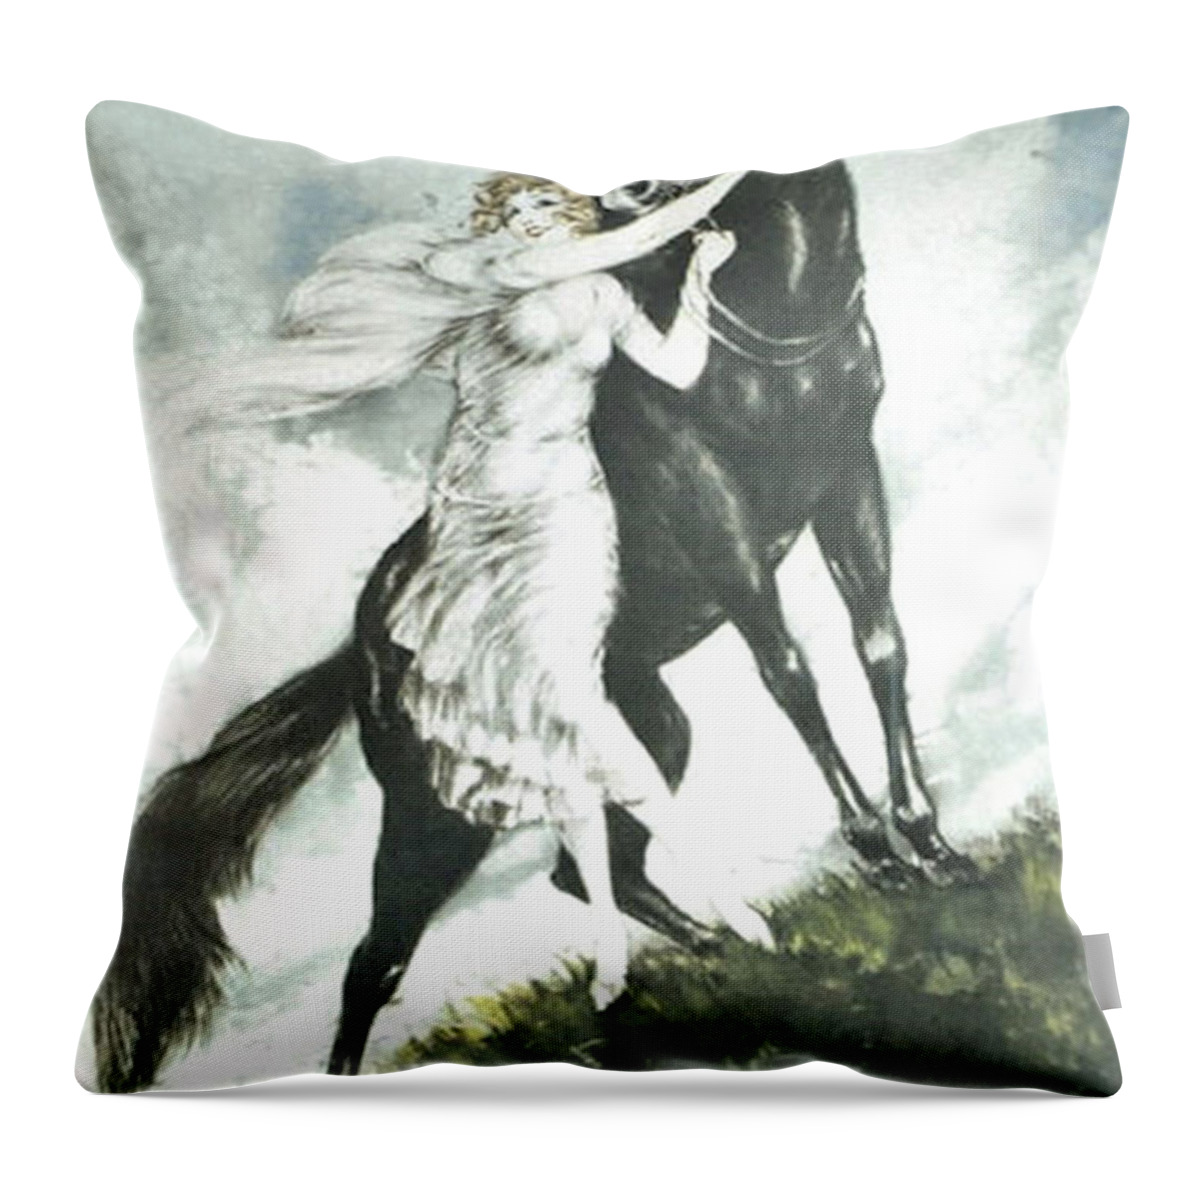 Louis Icart Throw Pillow featuring the painting Jeunesse by Louis Icart